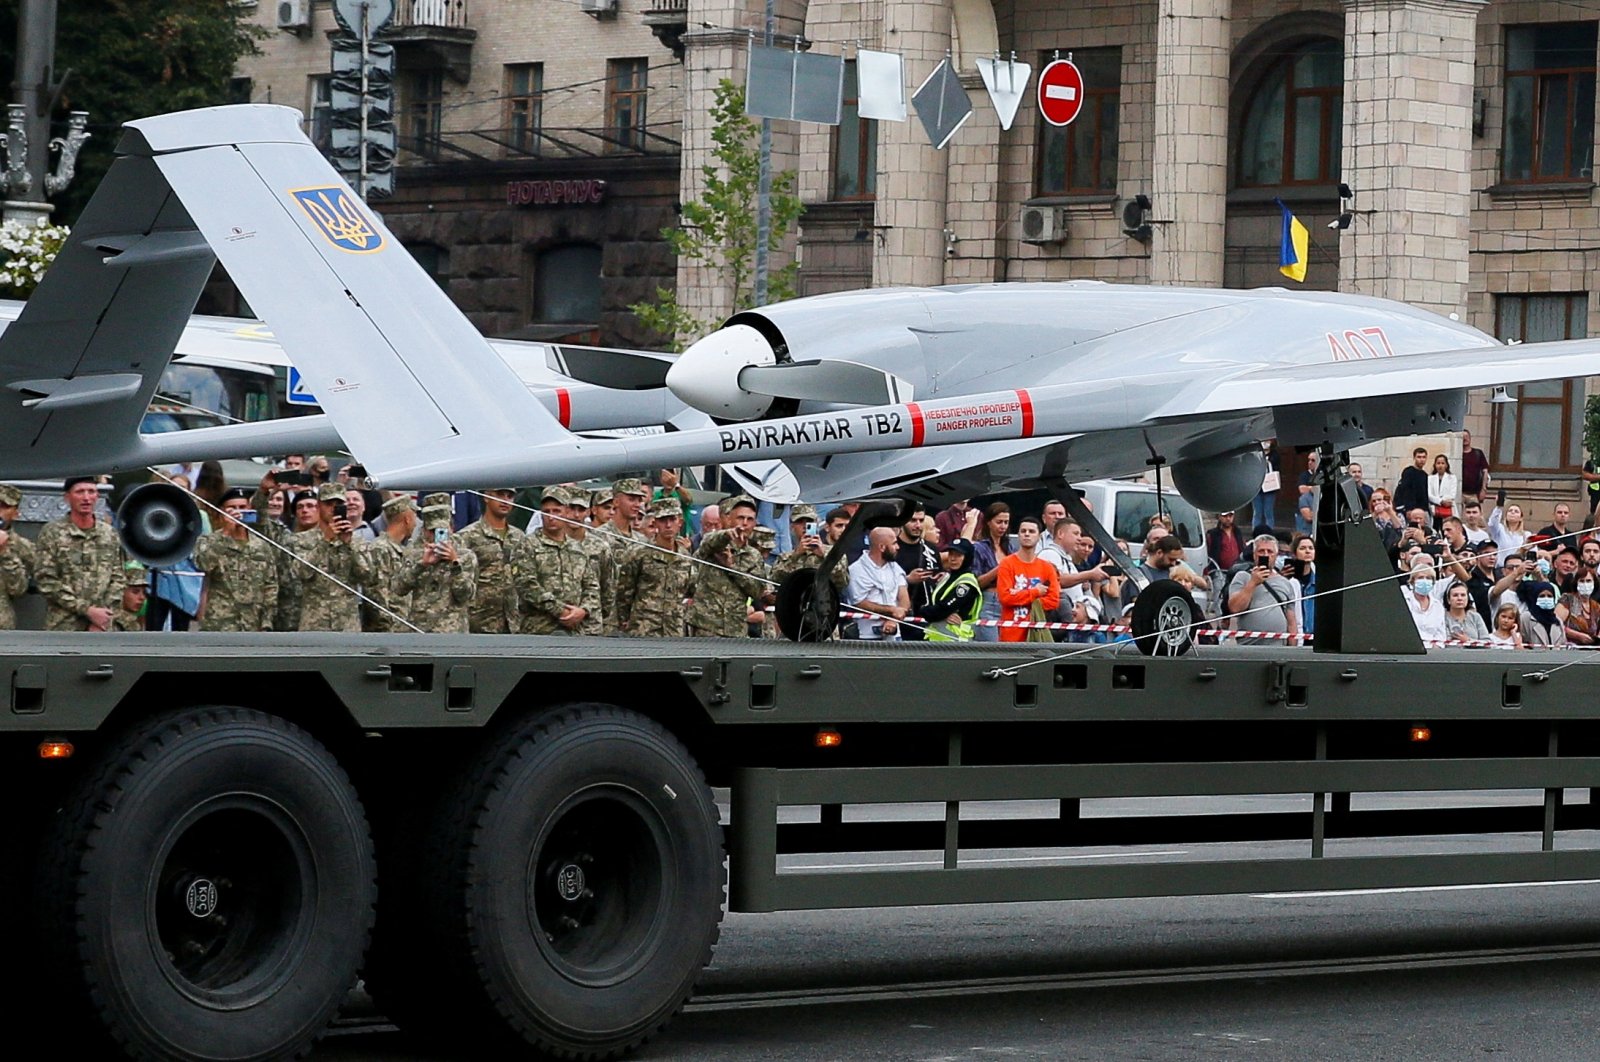 A Bayraktar drone seen during a rehearsal for the Independence Day military parade in central Kyiv, Ukraine Aug. 18, 2021. (Reuters File Photo)